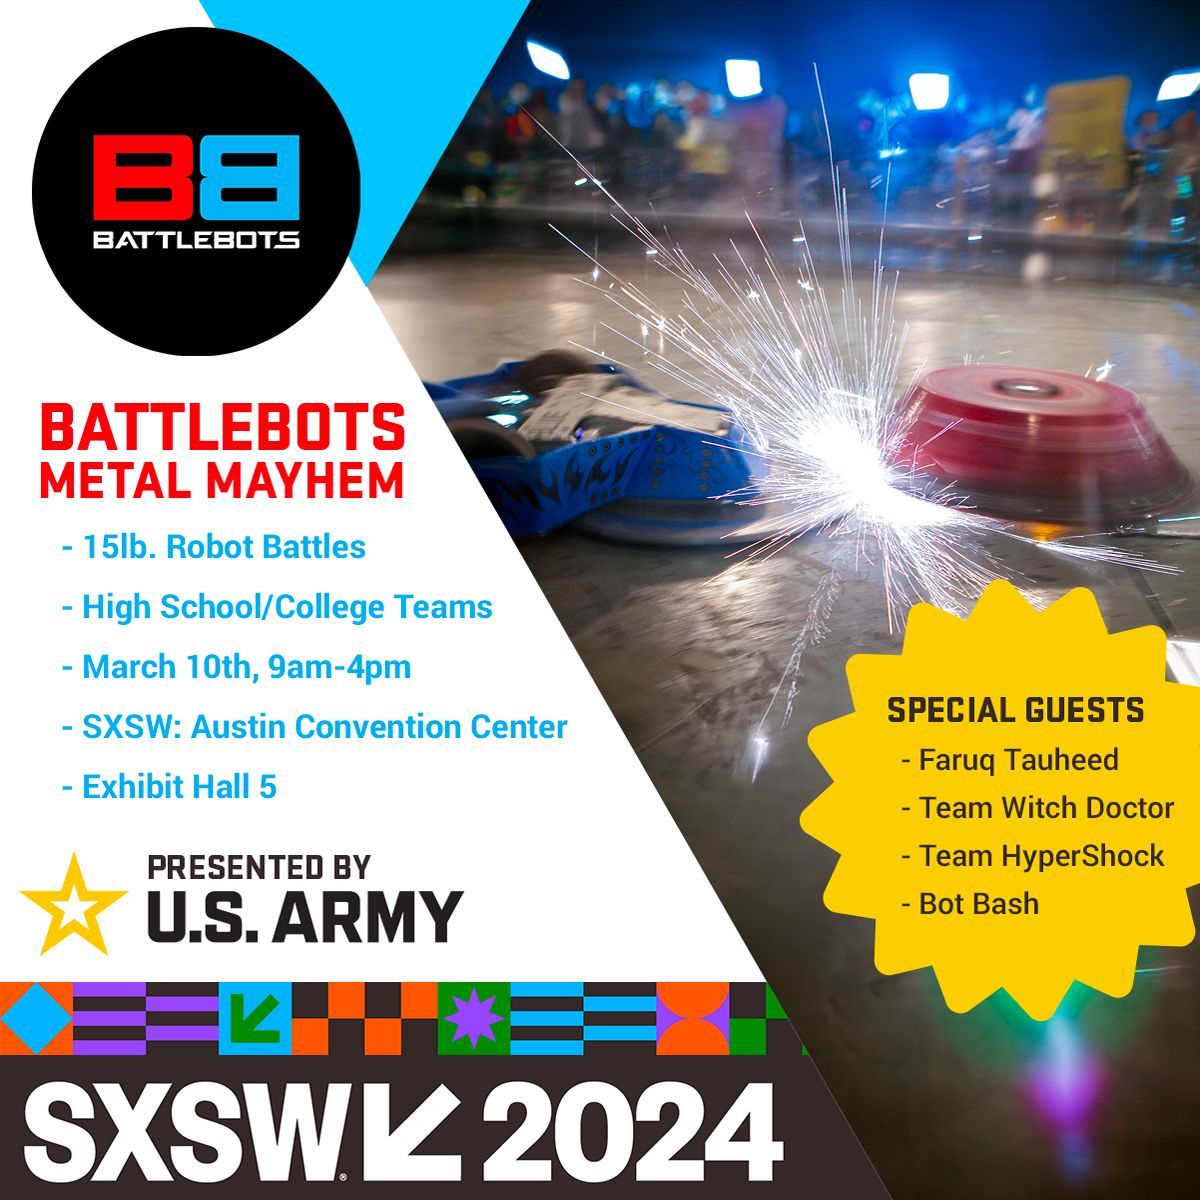 Join us at #SXSW on 3/10 for an exciting #BattleBots tournament featuring 15 lb. student robots! Teams @HyperShockTV, @witchdrshaman, ring announcer @Faruqadelphia, and Bot Bash Party service will be there too. All sponsored by the US Army @armyfutures. Event is FREE!